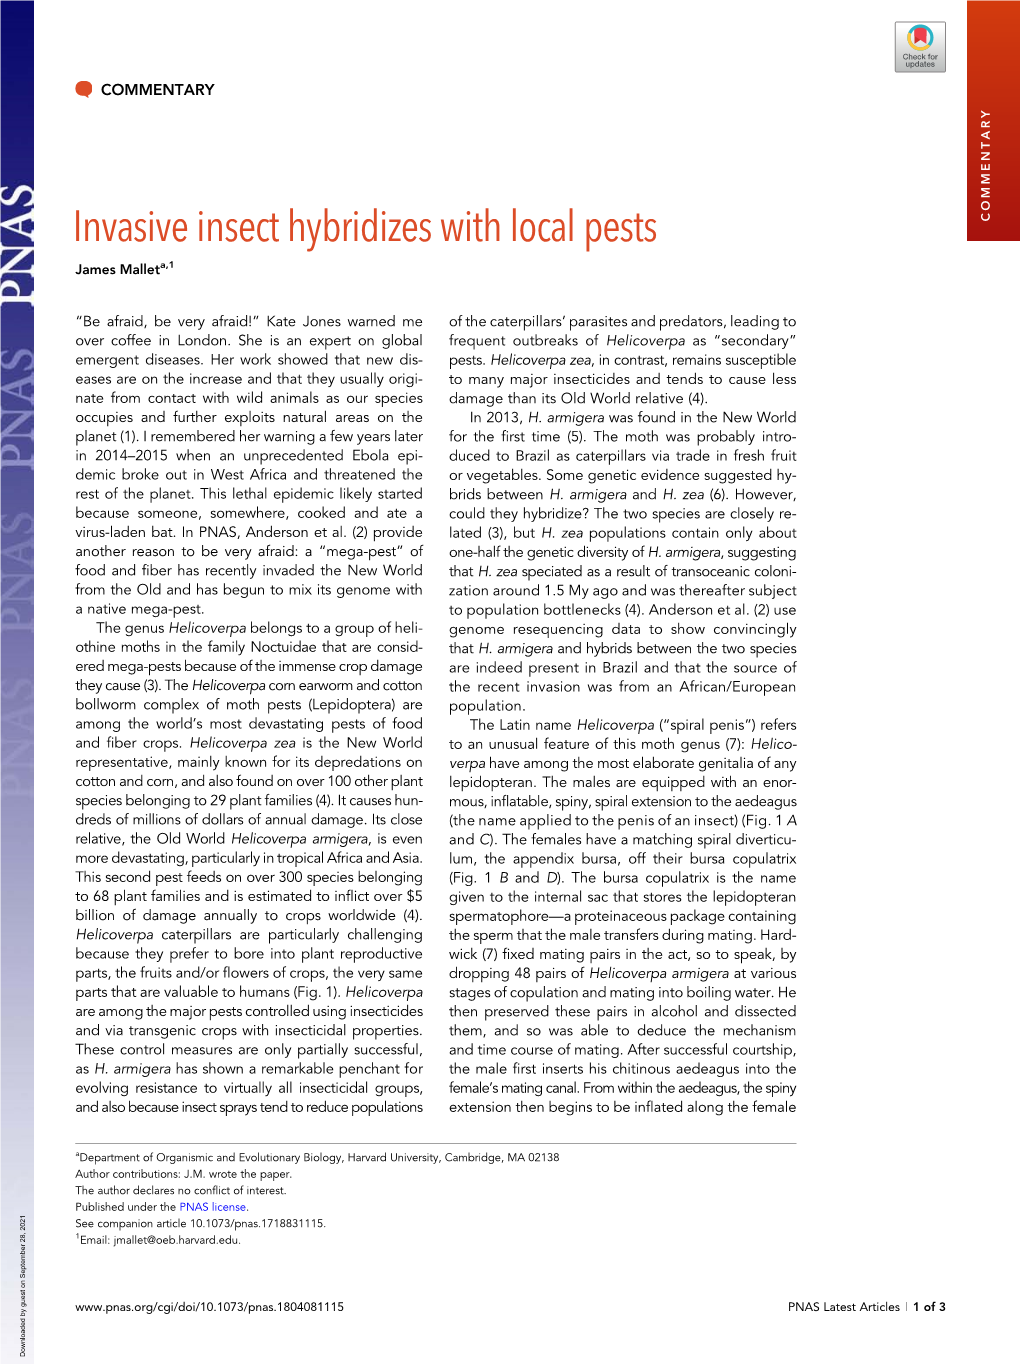 Invasive Insect Hybridizes with Local Pests COMMENTARY